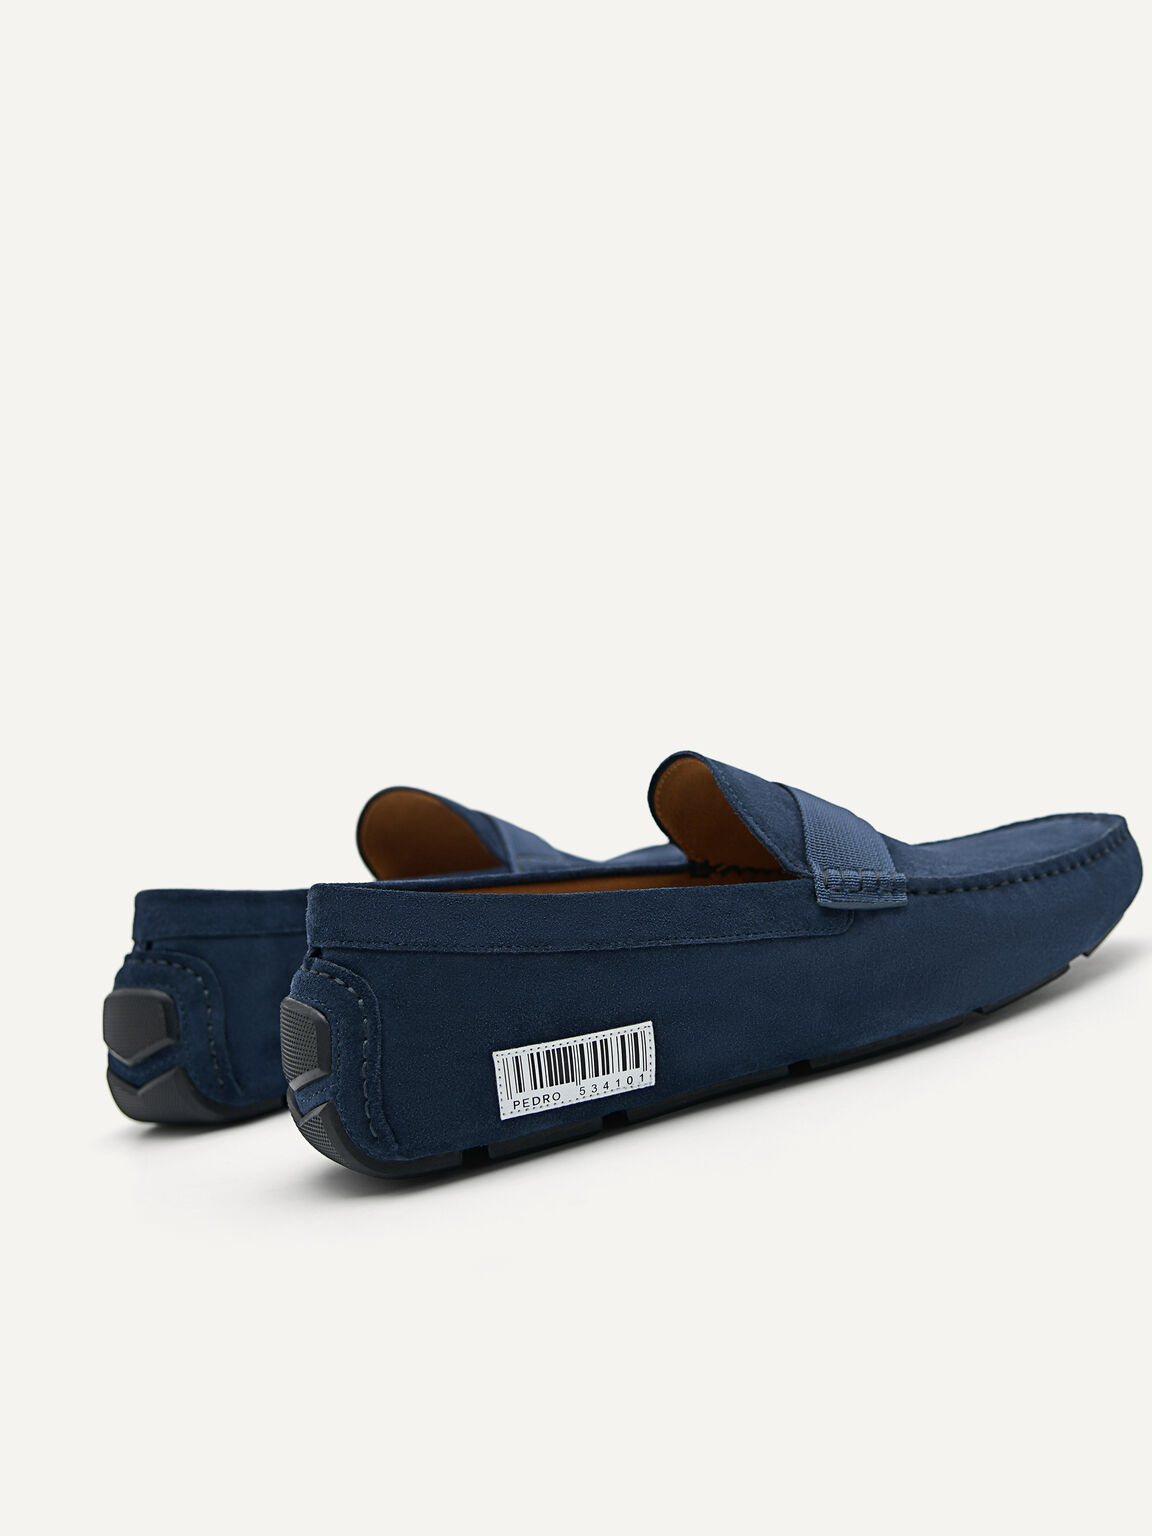 Suede Barcode Driving Moccassins, Navy